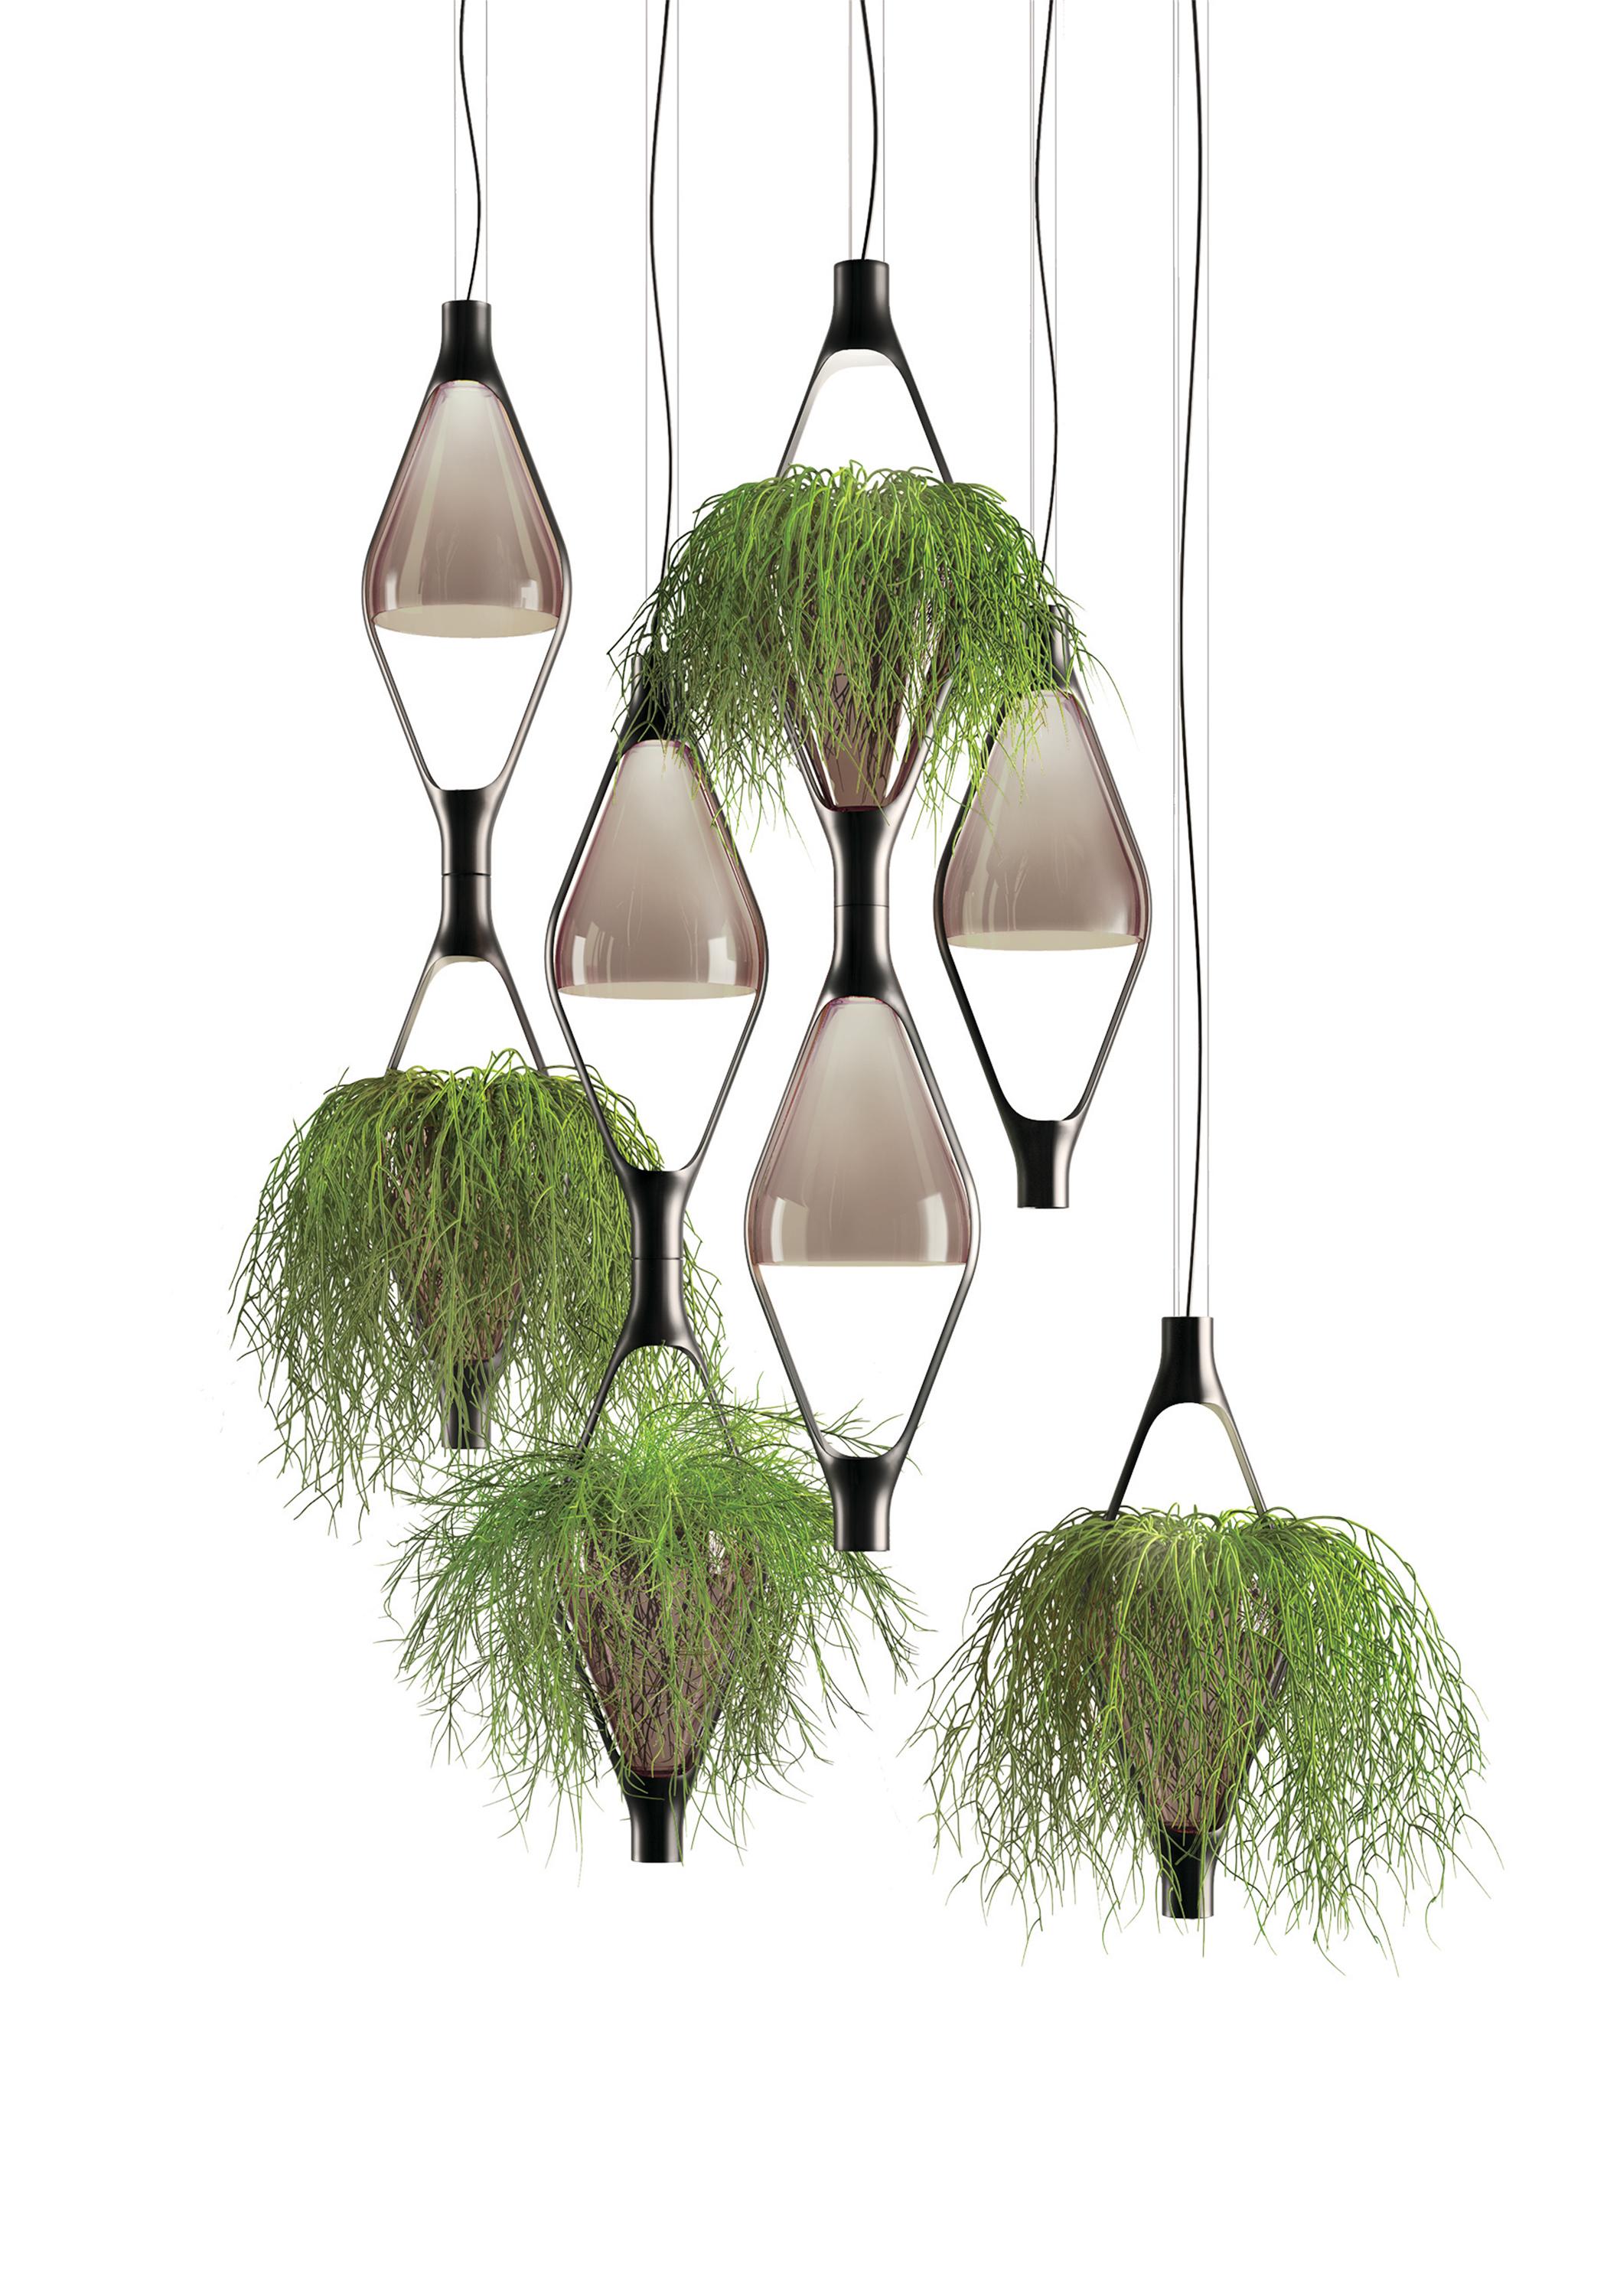 'Viceversa' Modular Suspension lamp by Noé Lawrance for KDLN in smoke gray.

Executed in smoke colored blown glass with a matte gray metallic structure. This unique suspension lamp doubles seamlessly as a hanging planter through the use of its